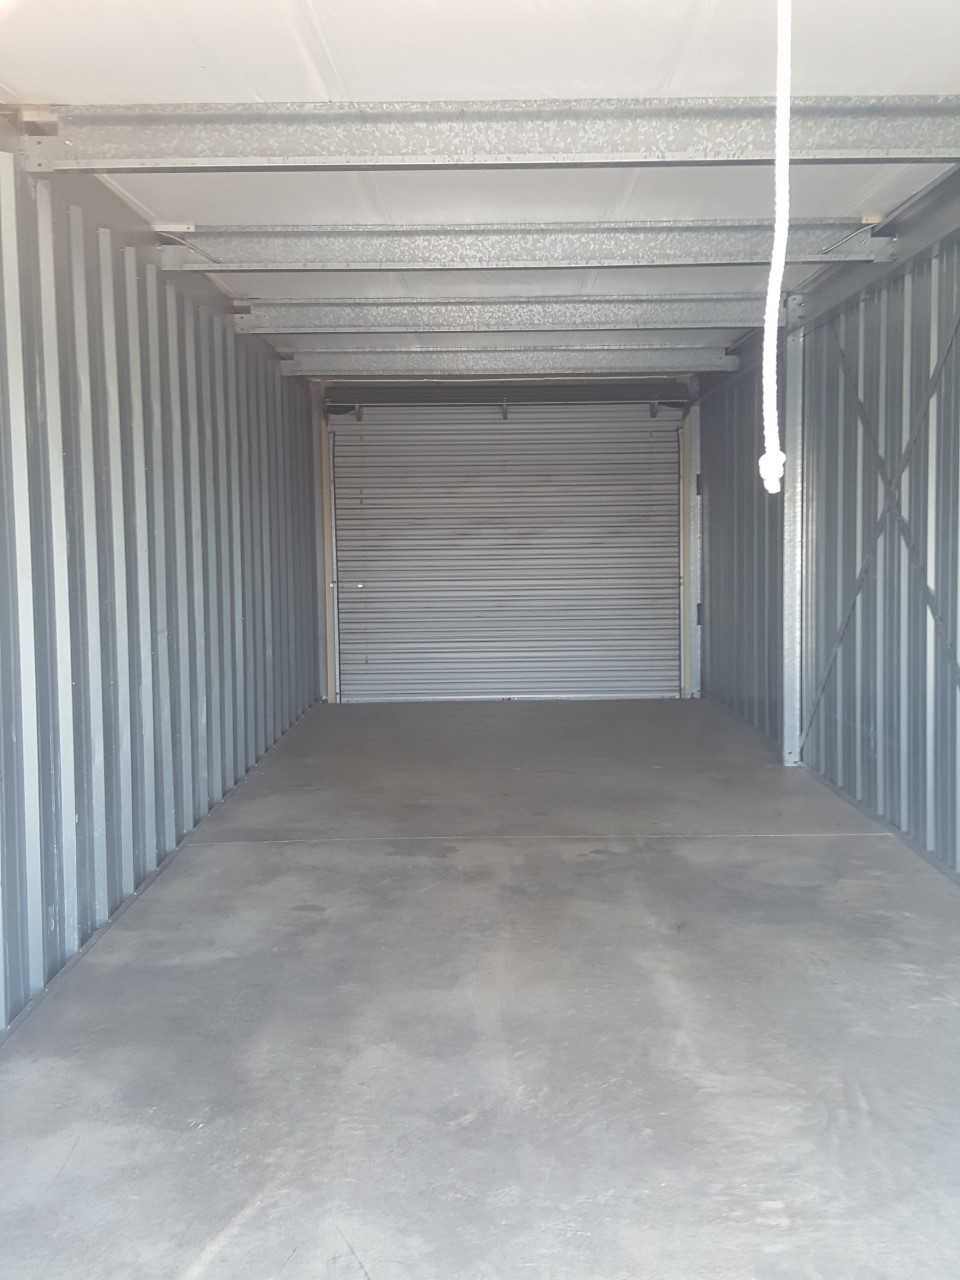 Inside of a large storage unit at My Place Self Storage.